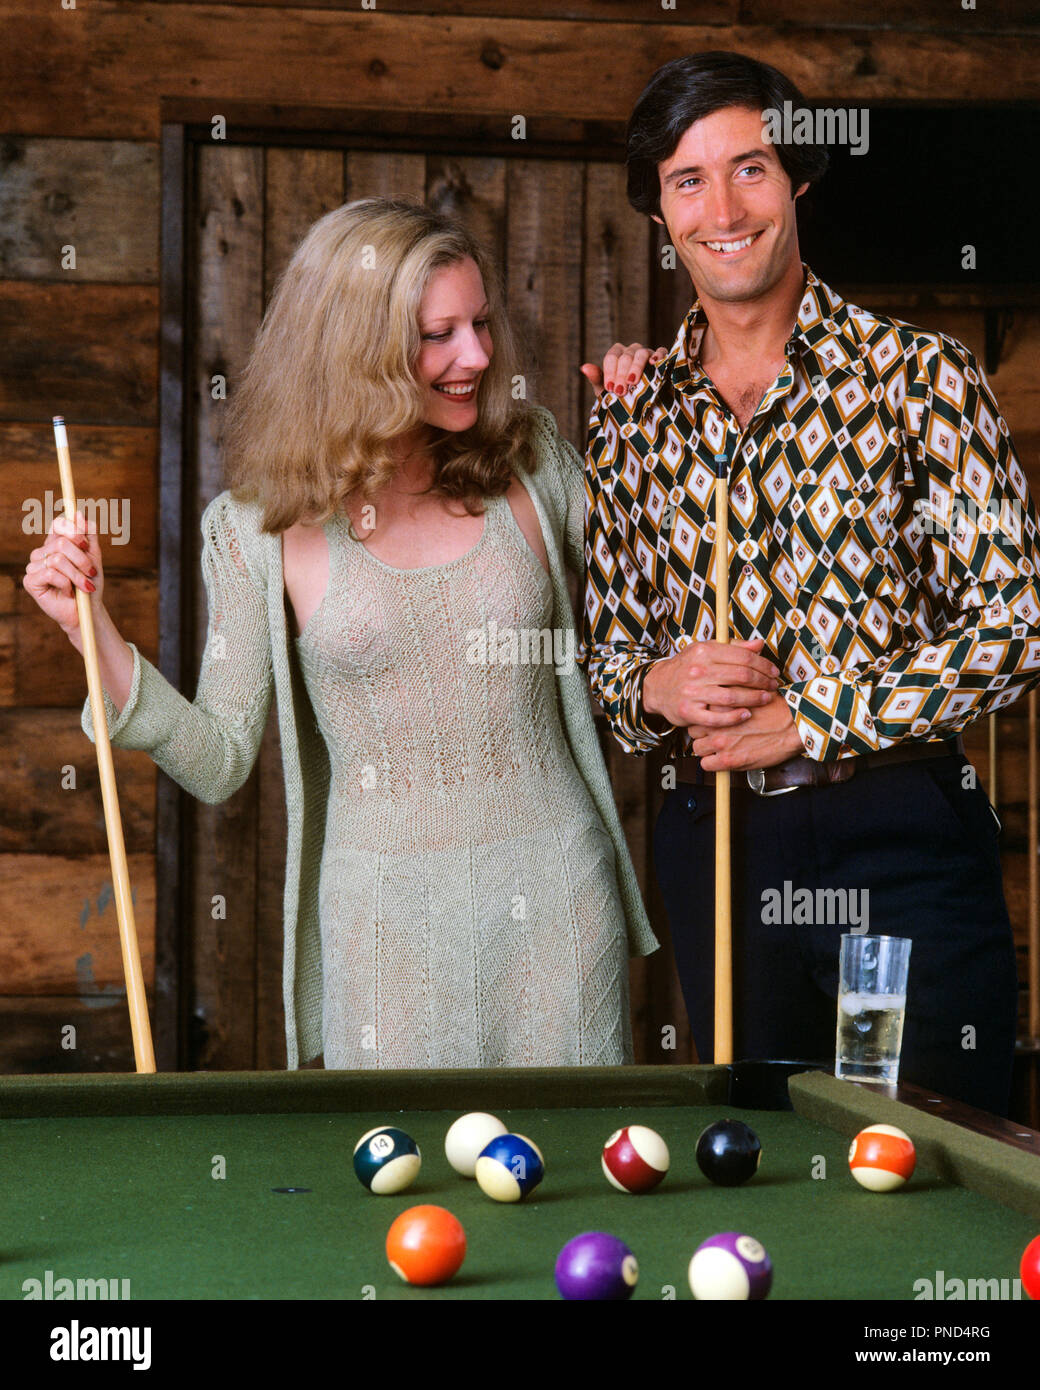 1970s COUPLE AT BILLIARD POOL TABLE IN RECREATION ROOM SPORTS MAN WOMAN  - ks21652 PHT001 HARS YOUNG ADULT SEXY TEAMWORK COMPETITION JOY LIFESTYLE FEMALES SPOUSE HUSBANDS GROWNUP HEALTHINESS HOME LIFE COPY SPACE FRIENDSHIP HALF-LENGTH PERSONS GROWN-UP HUSBAND AND WIFE MEN AND WOMEN TABLES HUSBANDS AND WIVES GOALS SPOUSES ACTIVITY HAPPINESS MATES LEISURE MATE EXCITEMENT RECREATION MAN AND WOMAN SMILES CONNECTION BILLIARDS MANLY STICKS STYLISH ACTIONS COOPERATION PEOPLE ADULTS POOL TABLE QUEUE TOGETHERNESS WIVES YOUNG ADULT MAN YOUNG ADULT WOMAN YOUNGSTER BILLIARD CAUCASIAN ETHNICITY Stock Photo